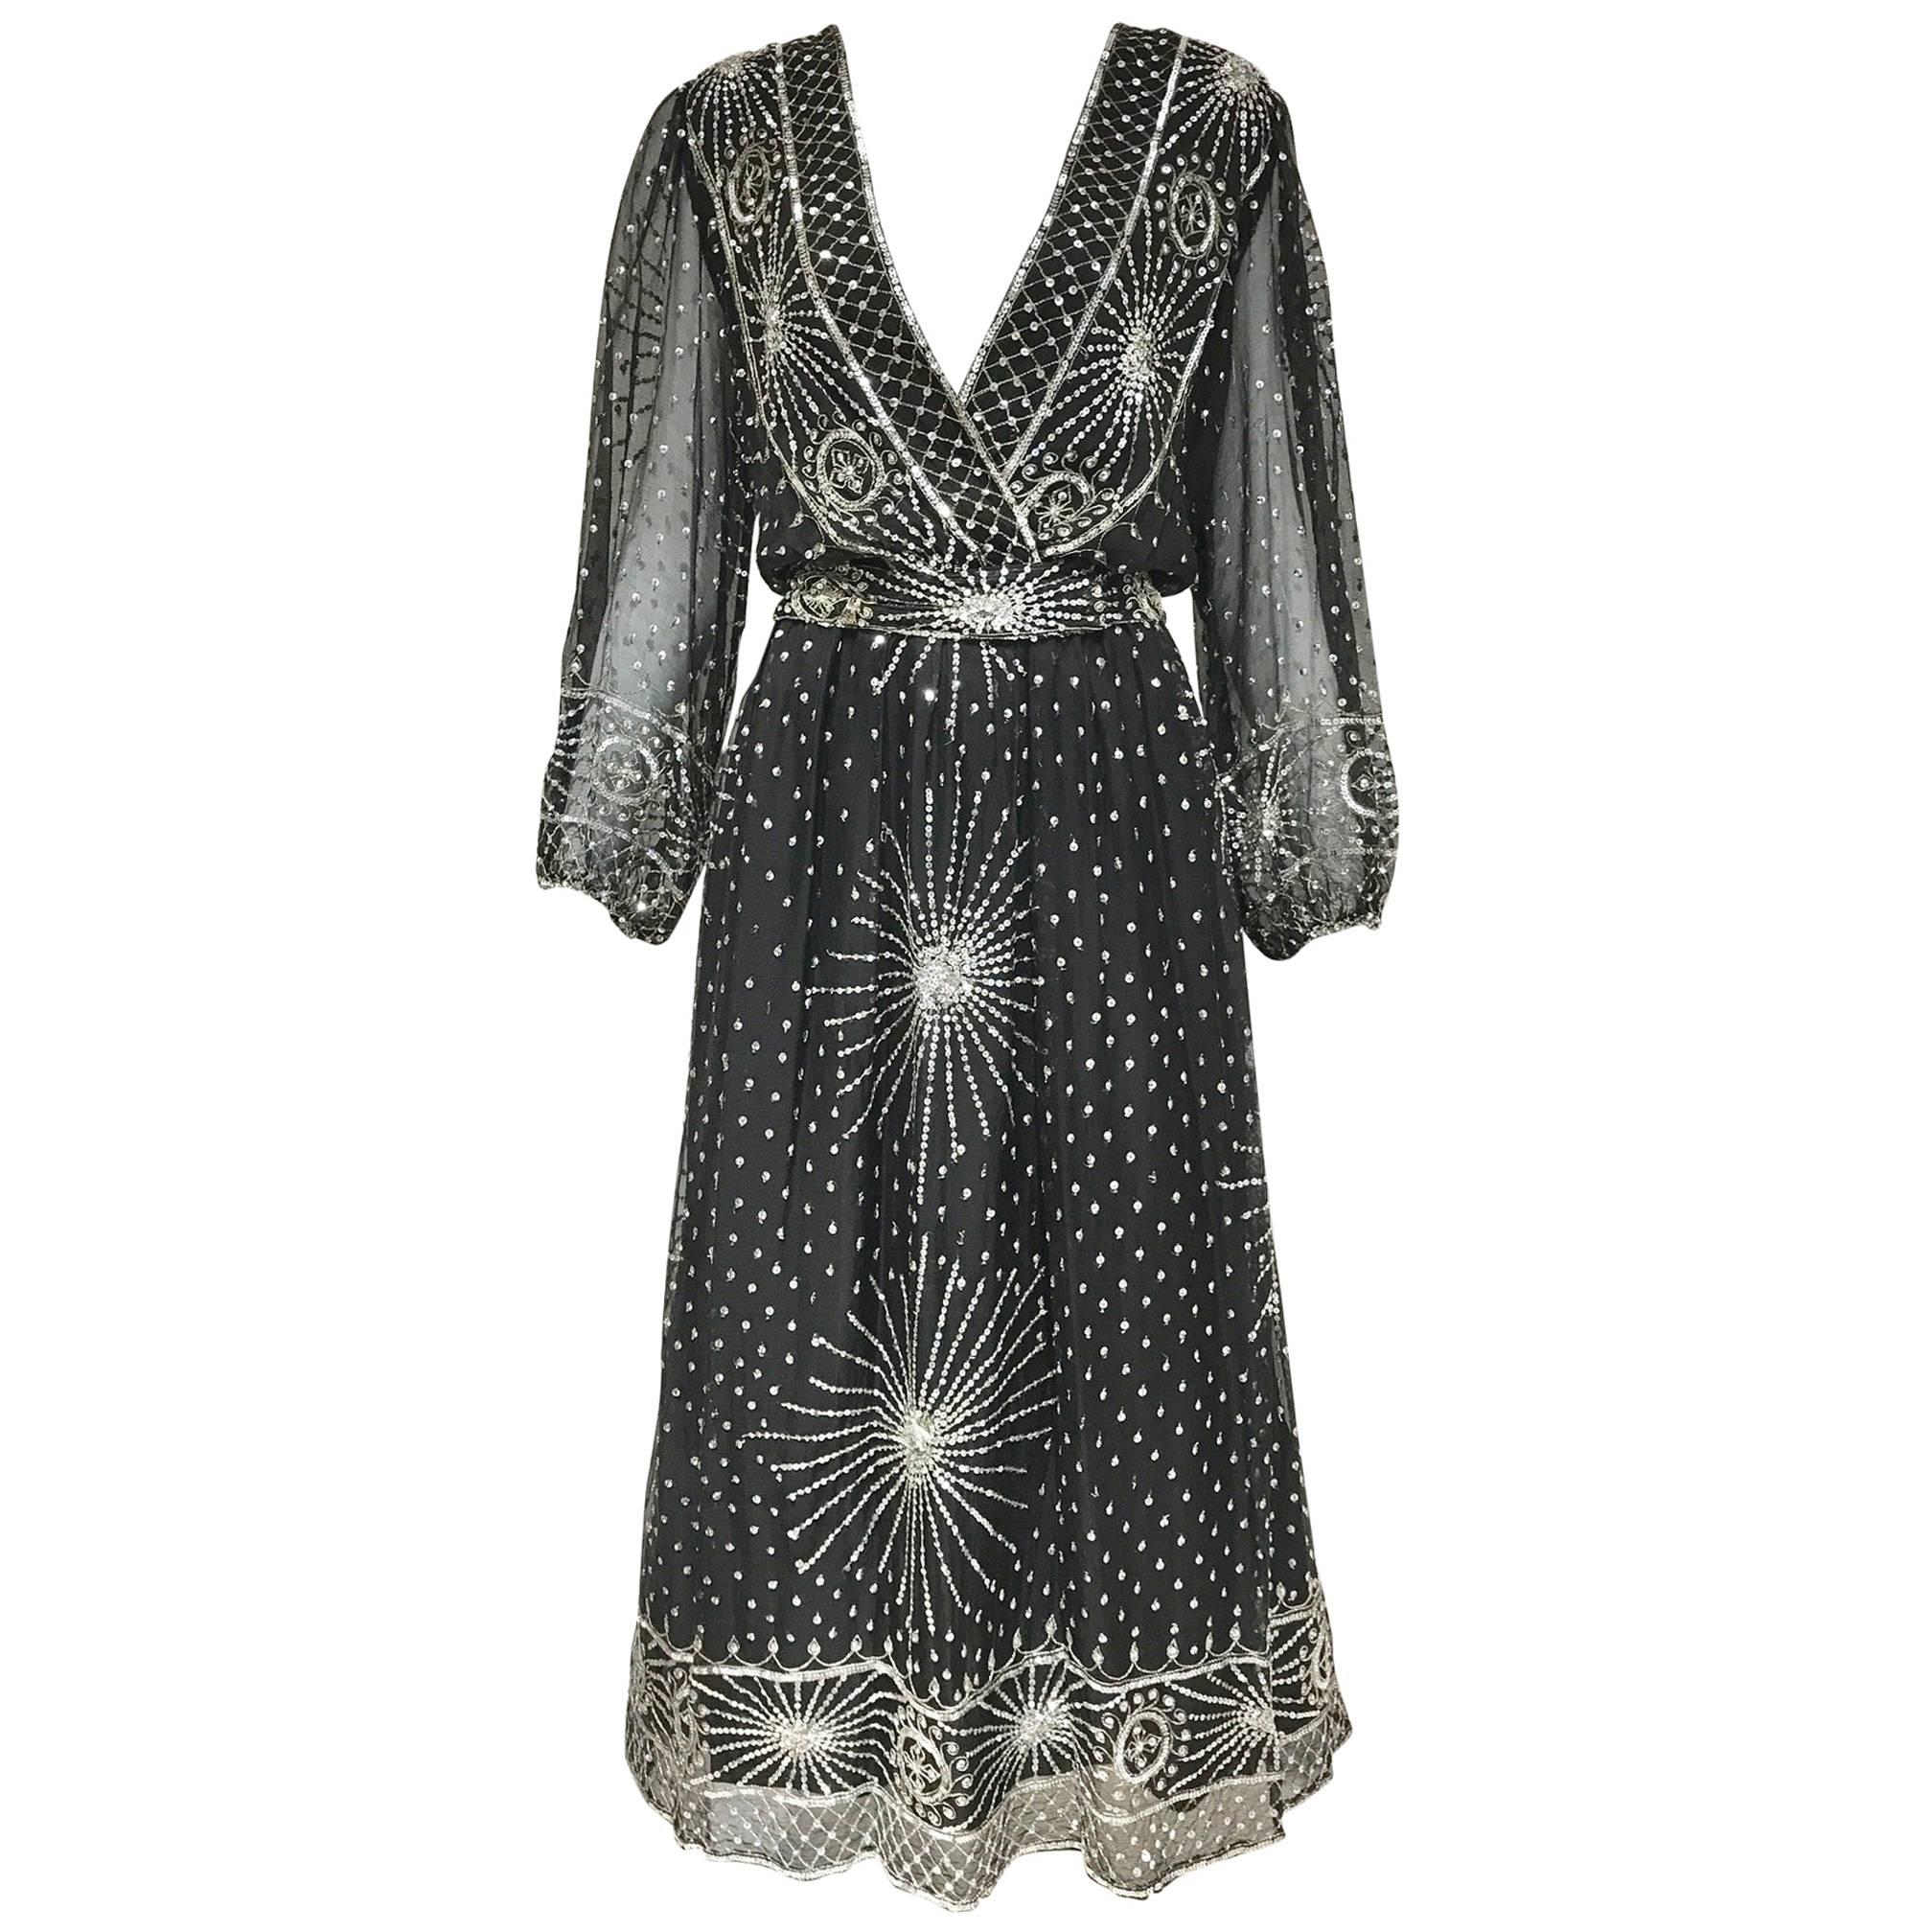 1970s Black Silk Dress with Silver Sequin